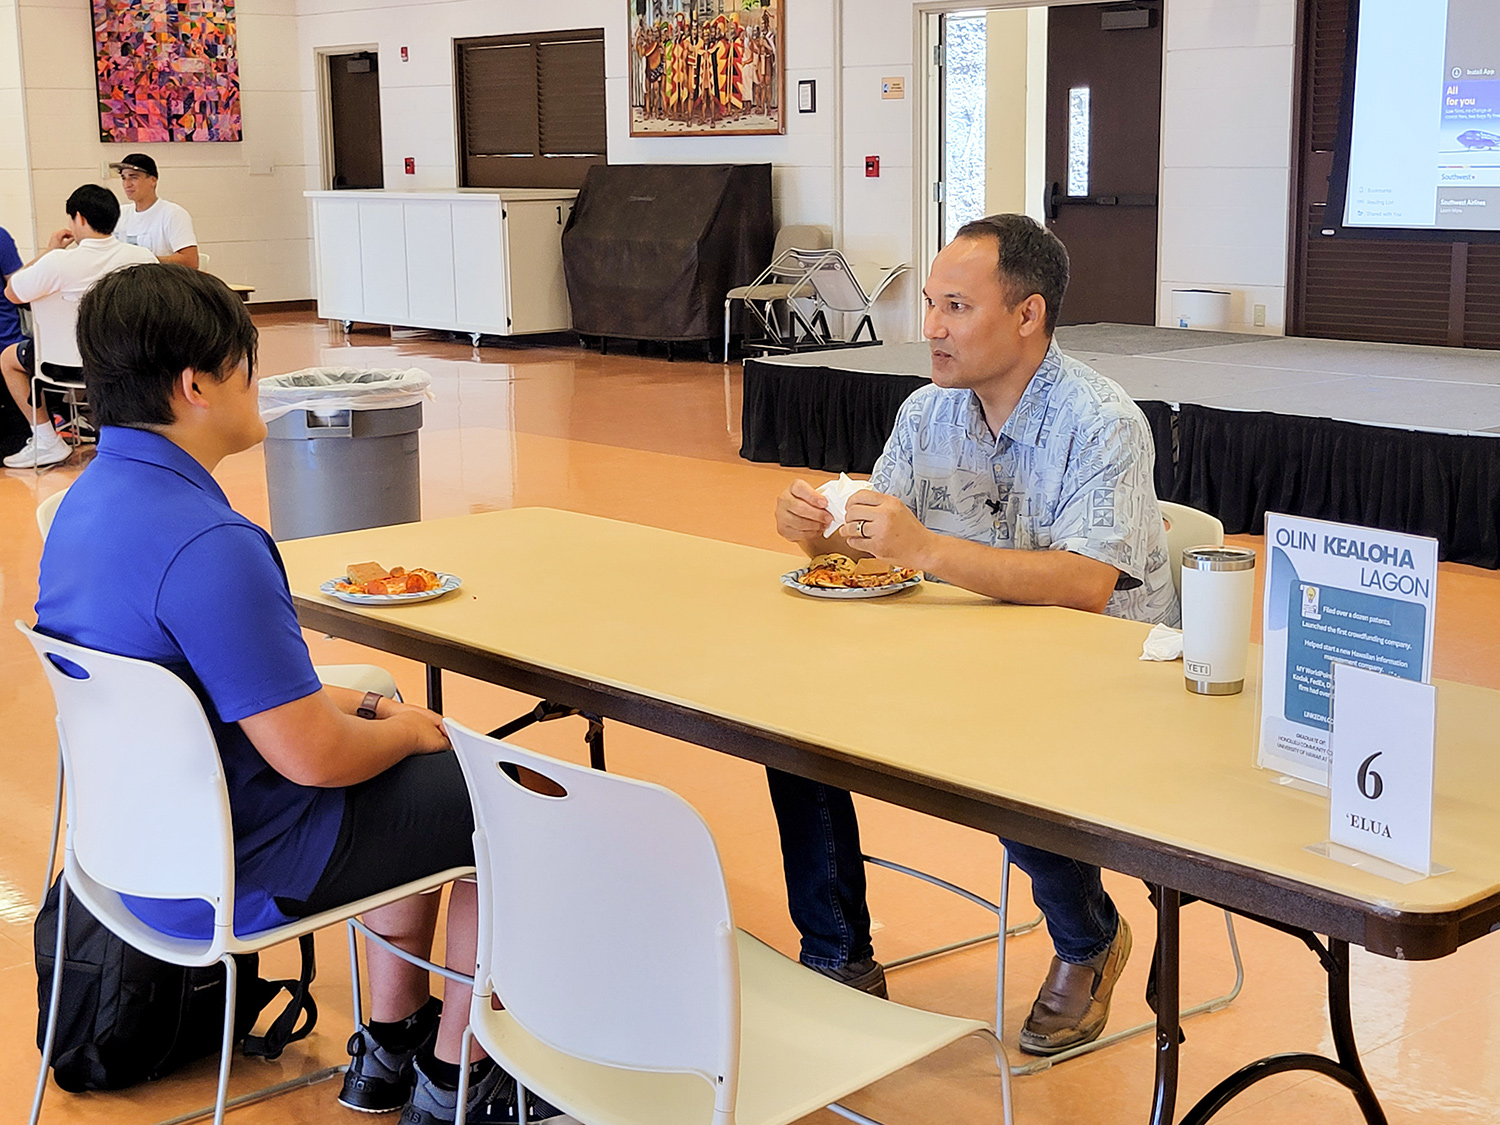 Man in a blue shirt is seated at a rectangular table and is talking to a male high school student sitting across from him.